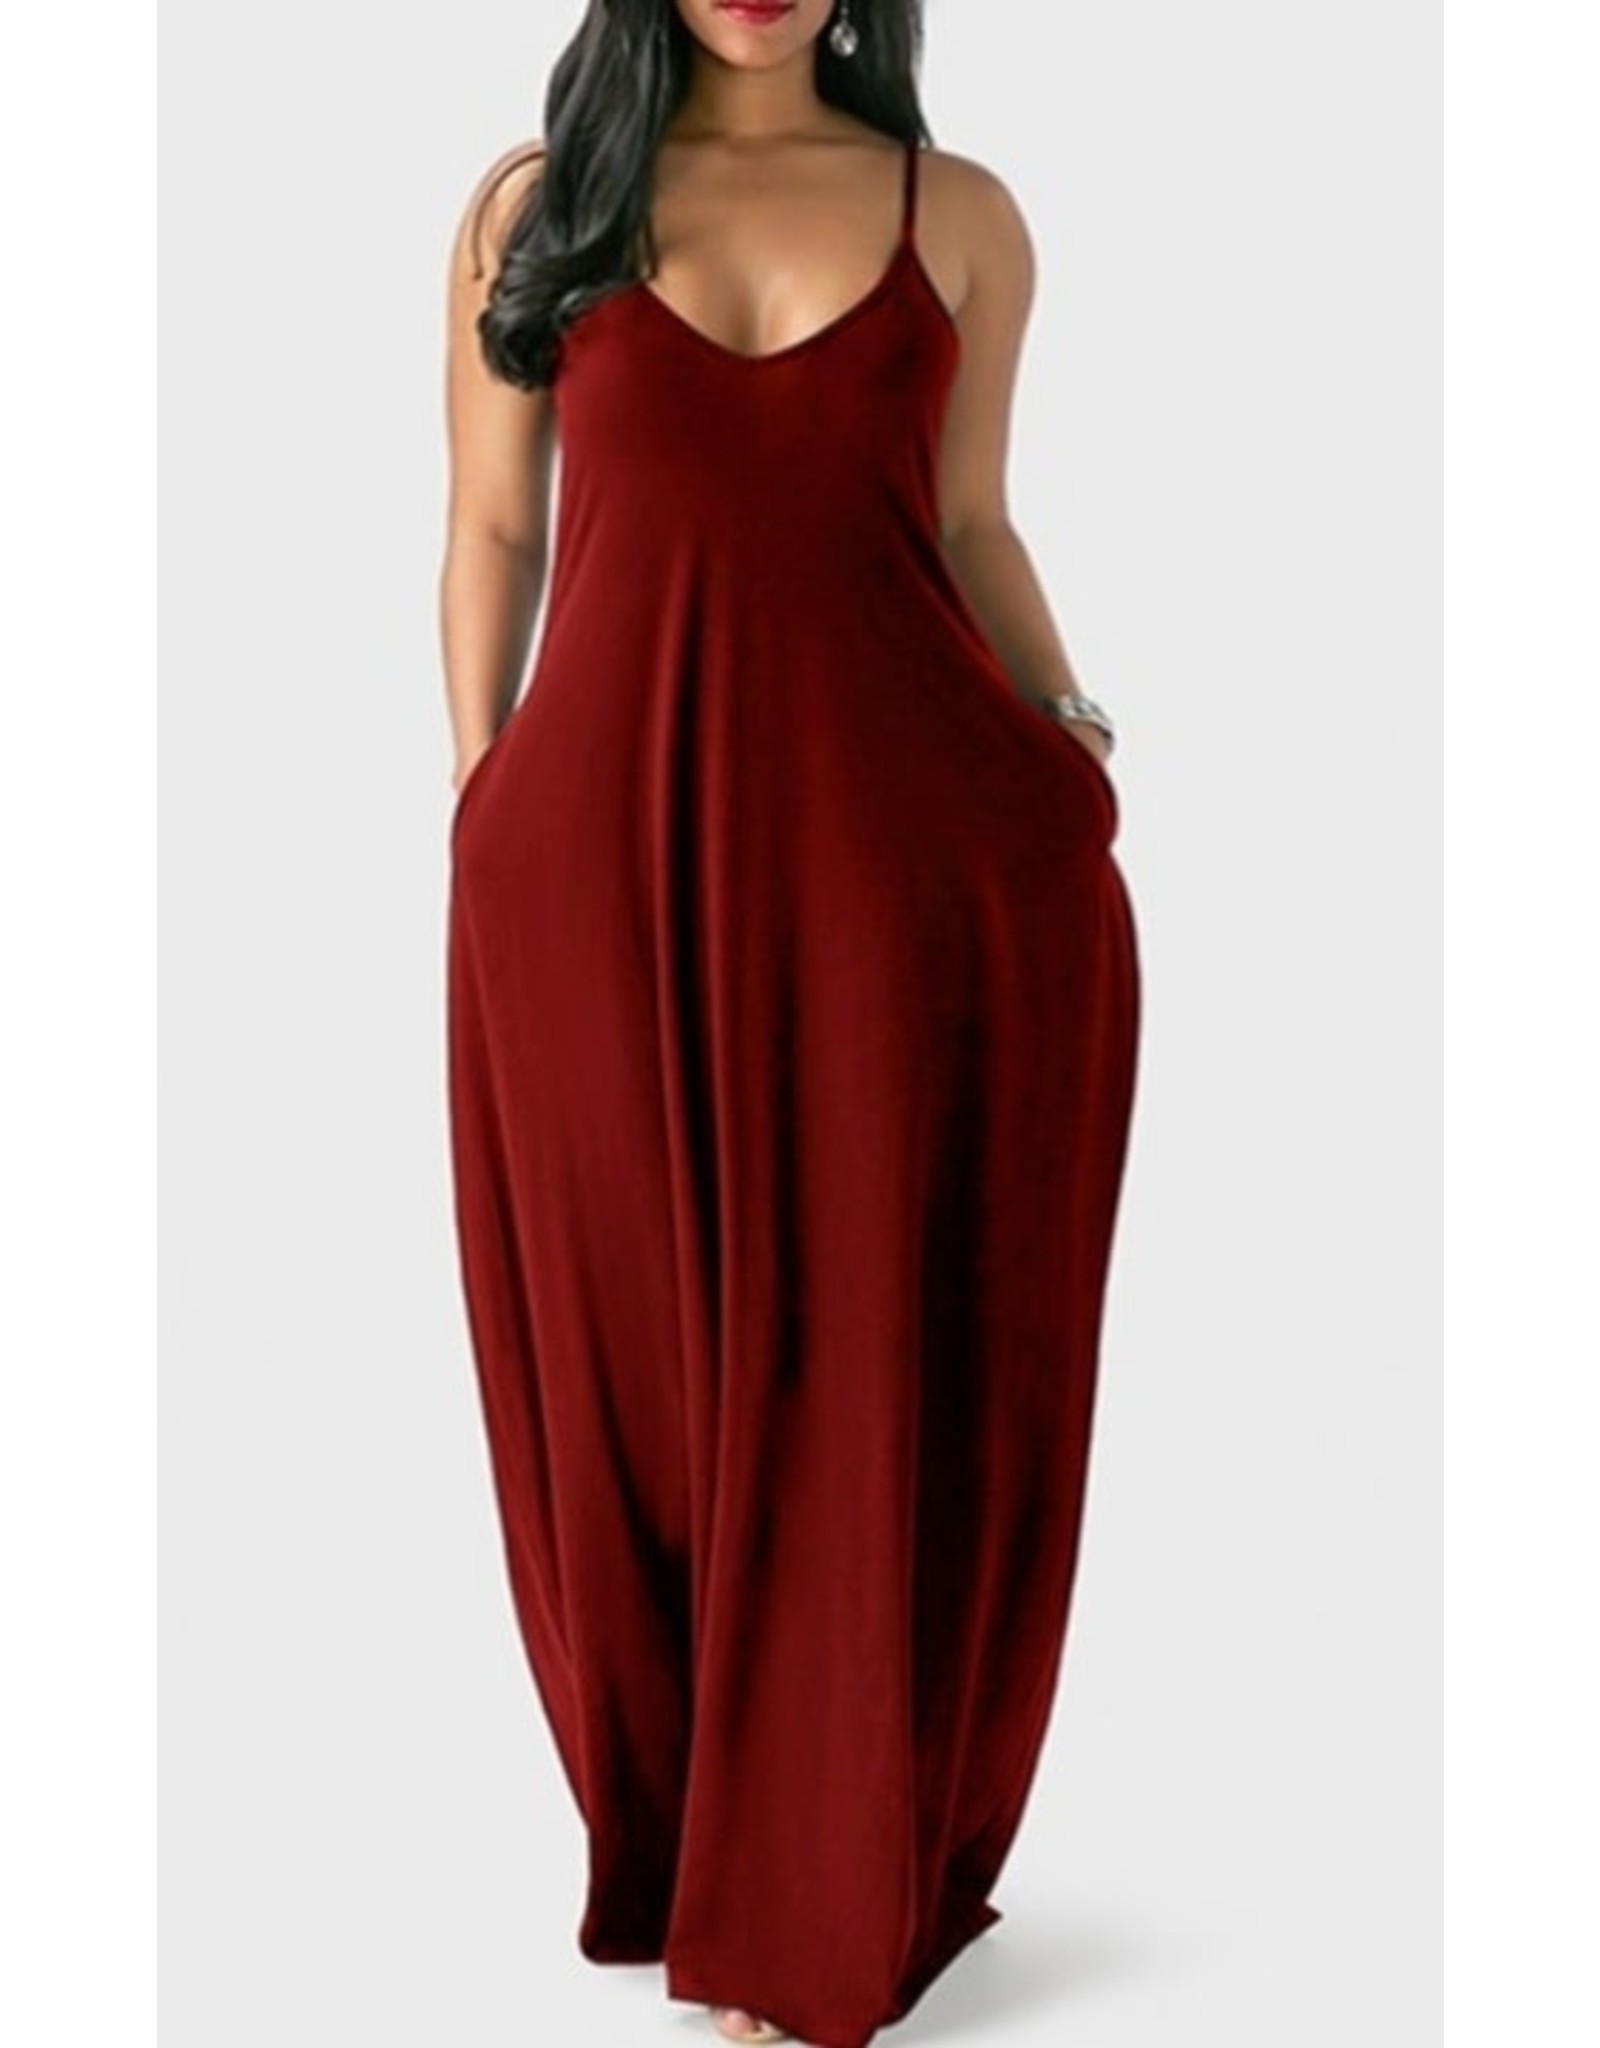 BELL'S BOUTIQUE Leisure Pocket Patched Red Maxi Plus Size Dress